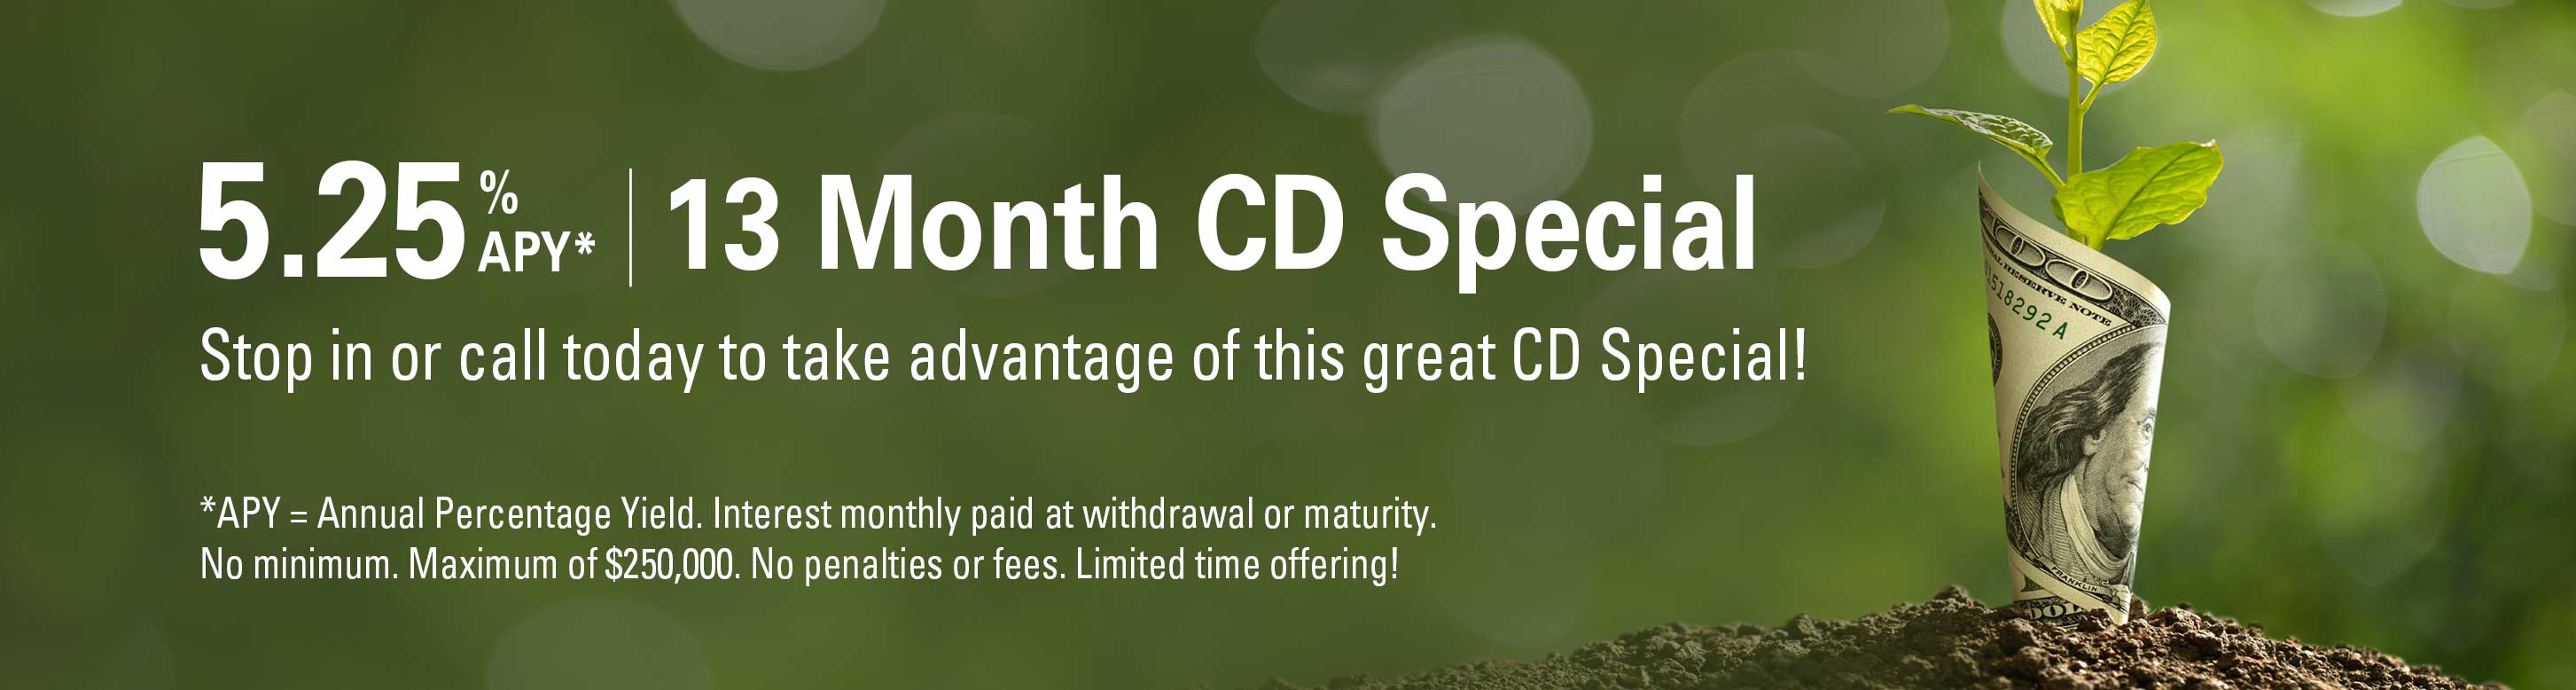 5.25%APY - 13 Month CD Special. Stop in or call today to take advantage of this great CD Special! *APY = Annual Percentage Yield. Interest monthly paid at withdrawal or maturity. No minimum. Maximum of $250,000. No penalties or fees. Limited time offering!